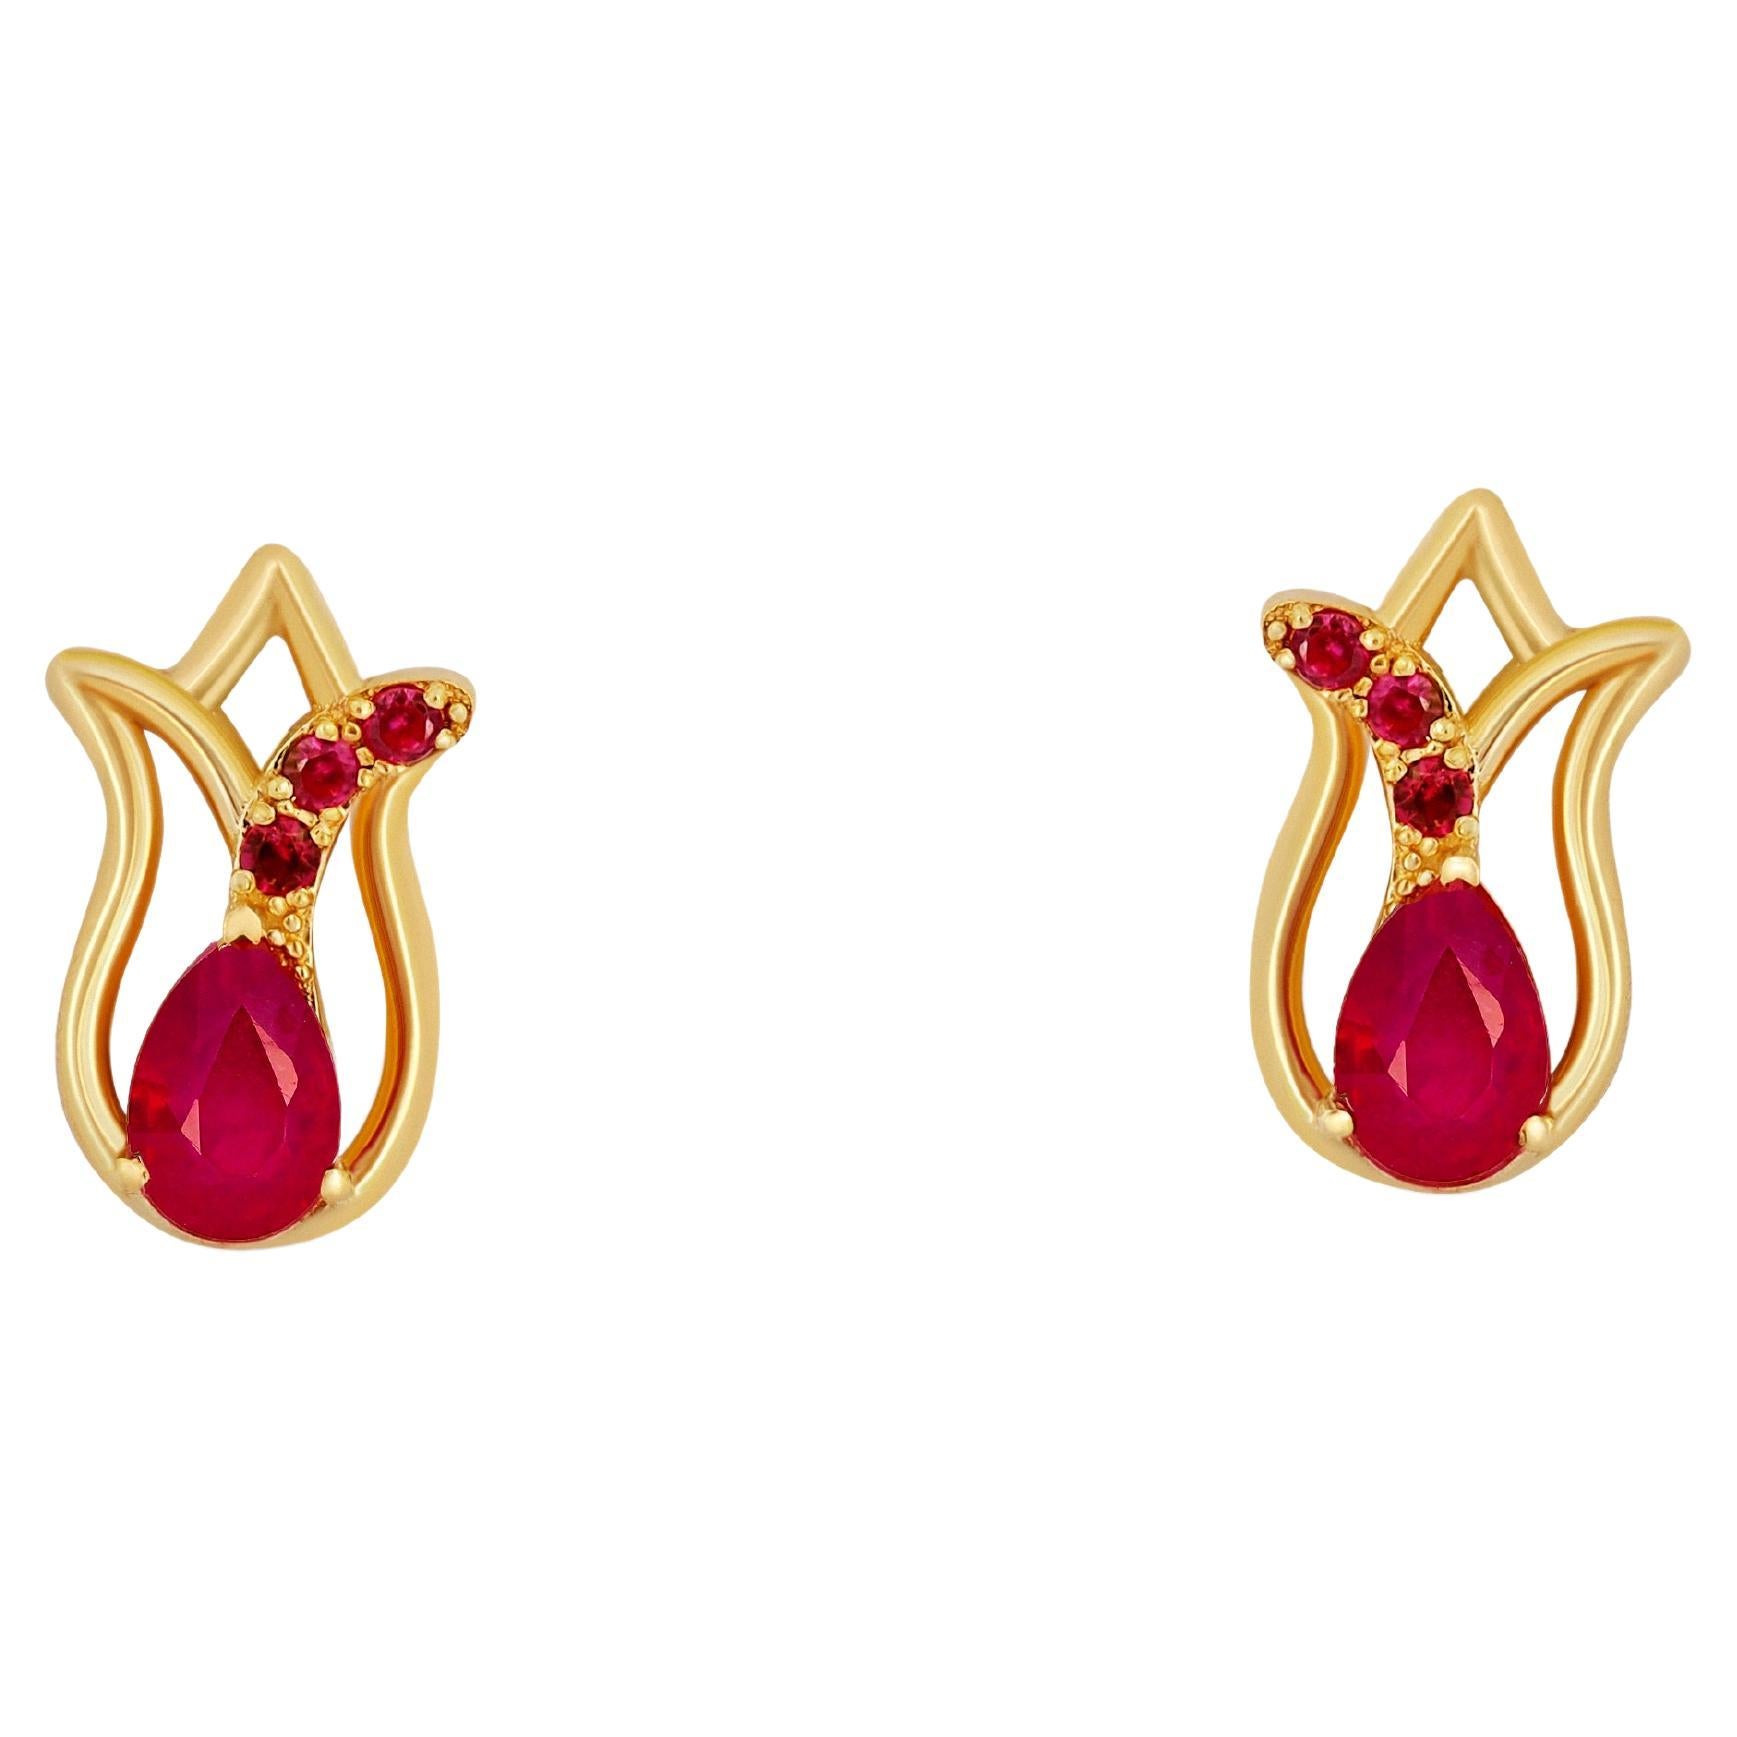 Tulip flower earrings studs with rubies in 14k gold For Sale